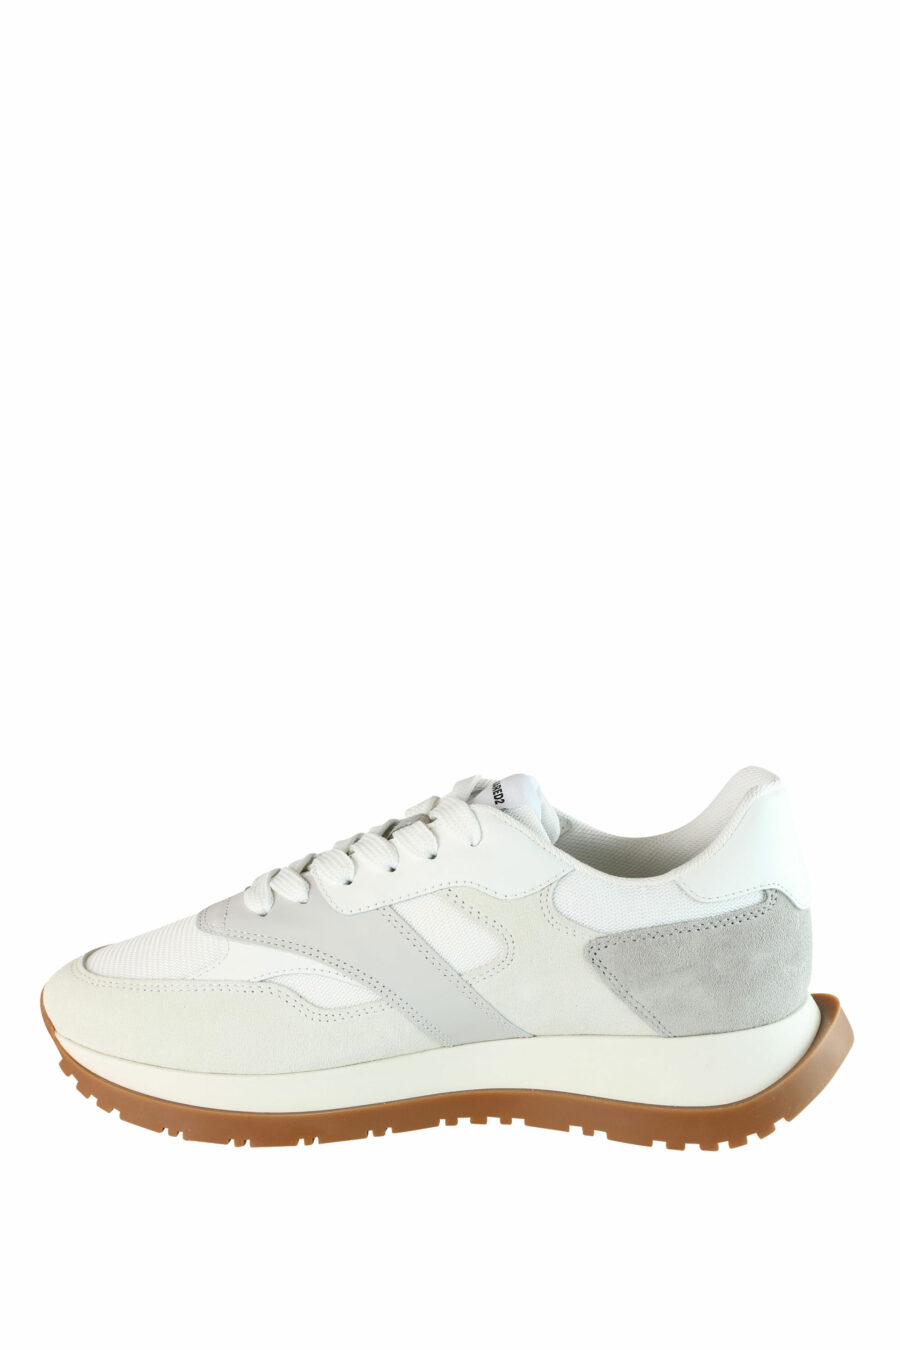 White running shoes with grey and beige details - IMG 1399